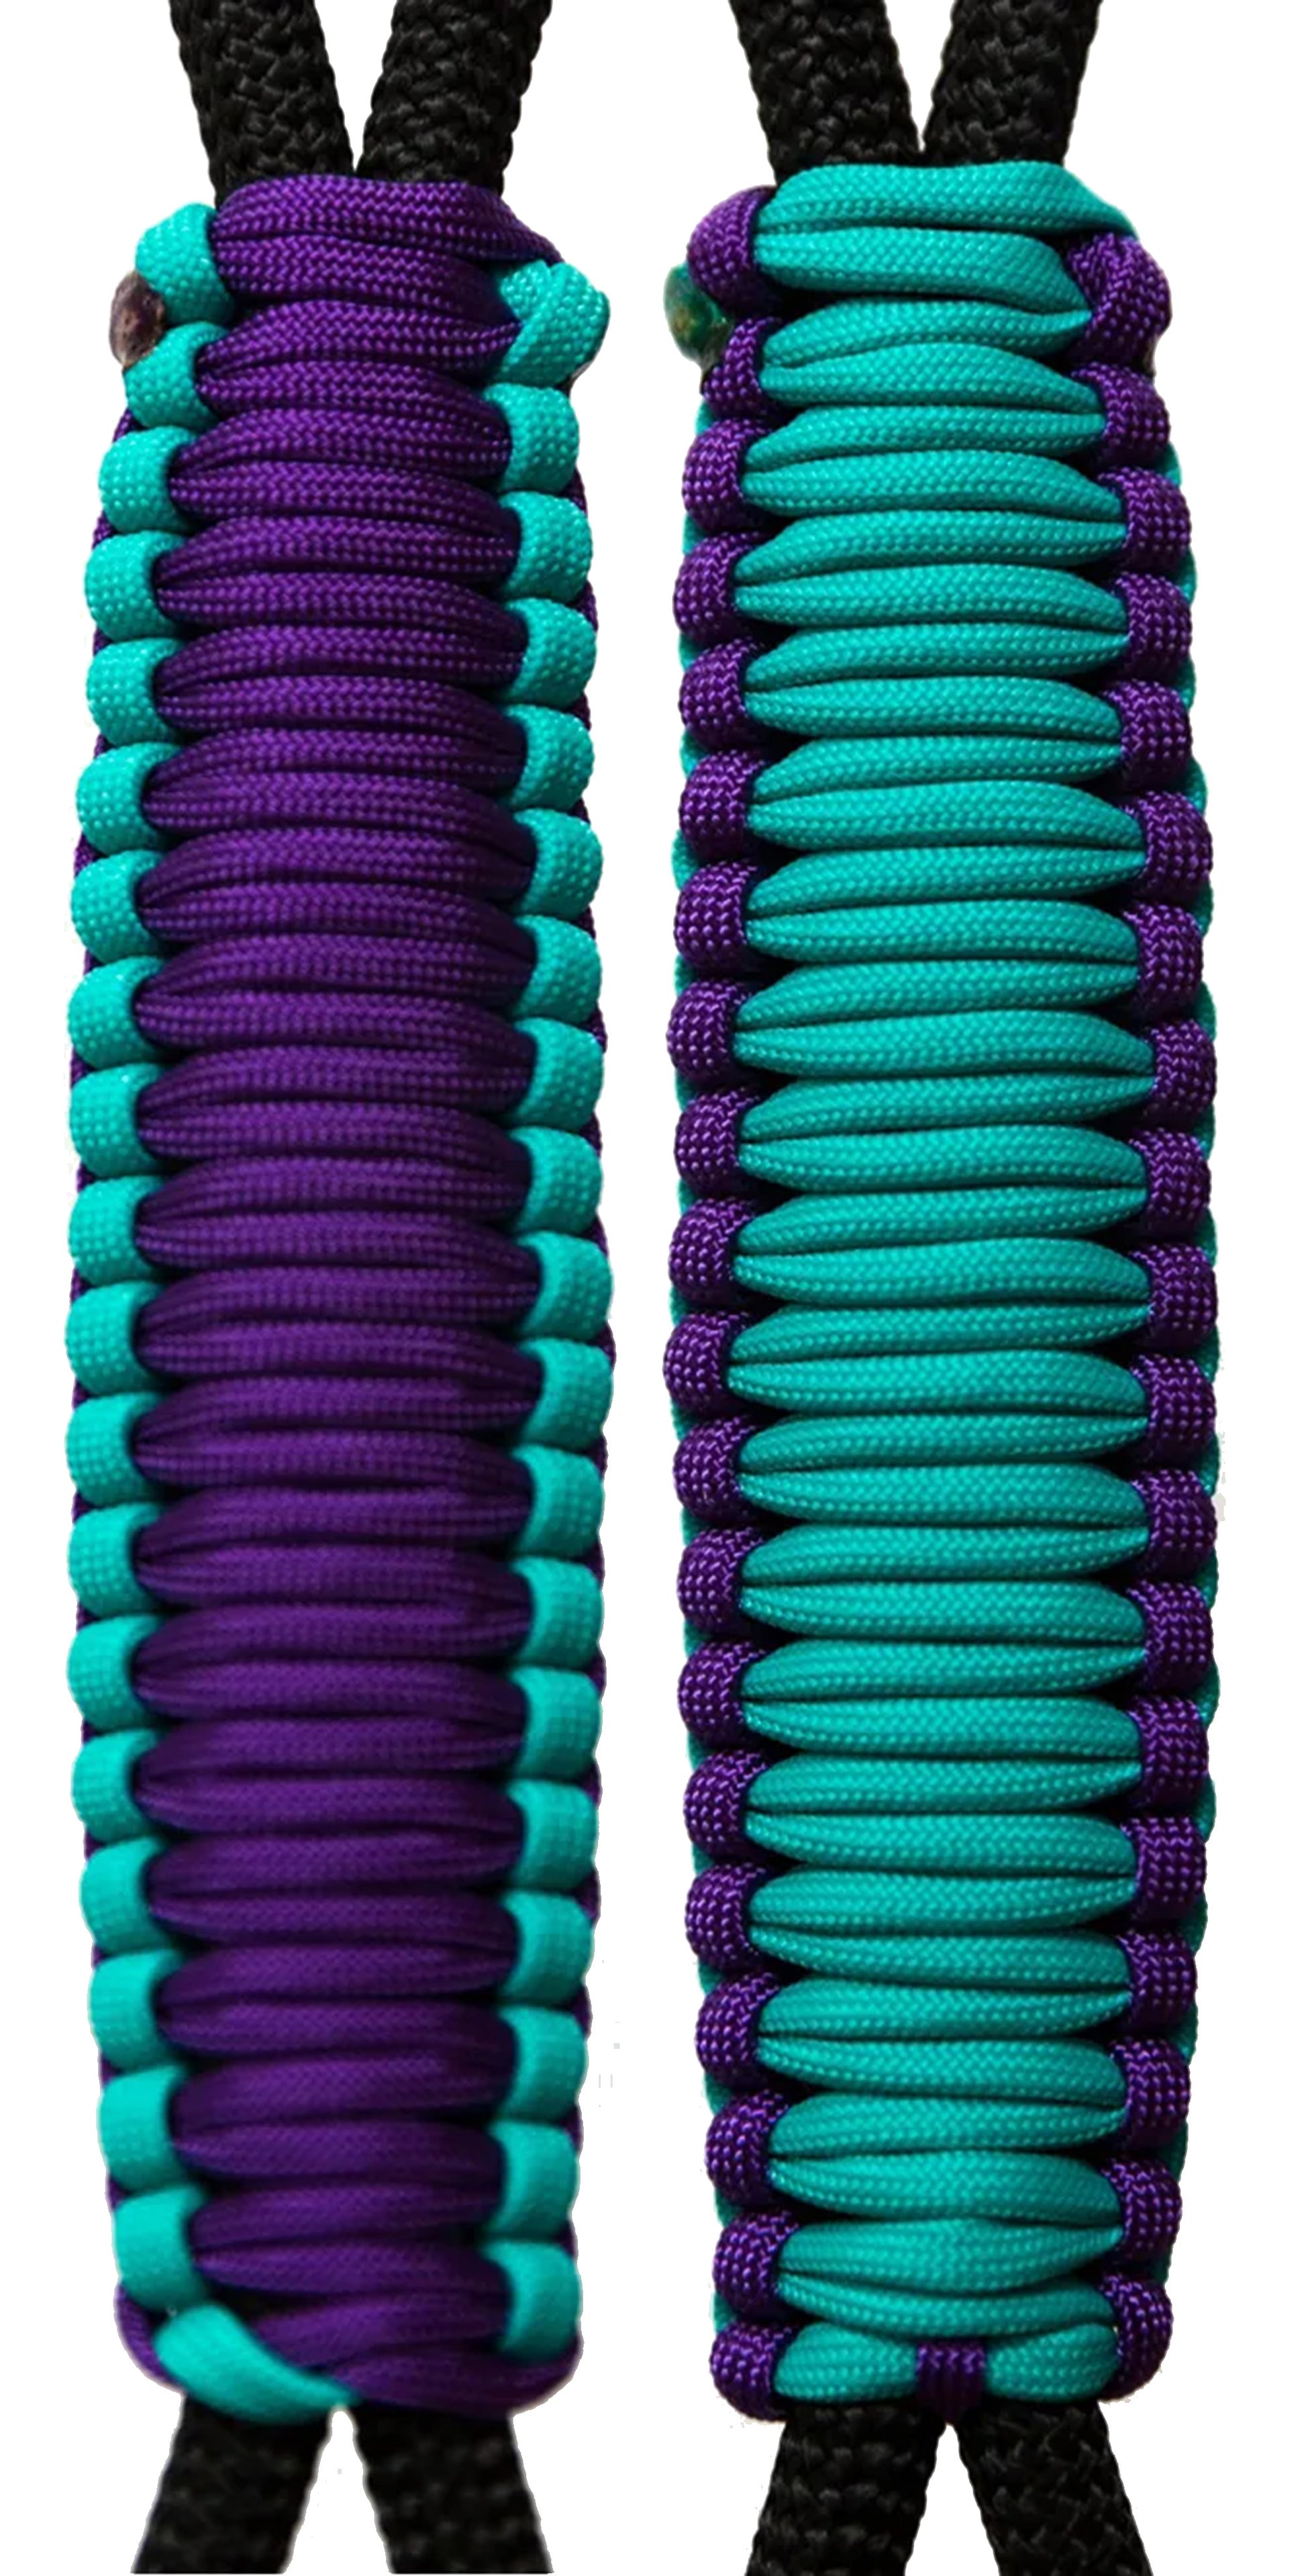 Teal & Purple C017C024 - Paracord Handmade Handles for Stainless Steel Tumblers - Made in USA!